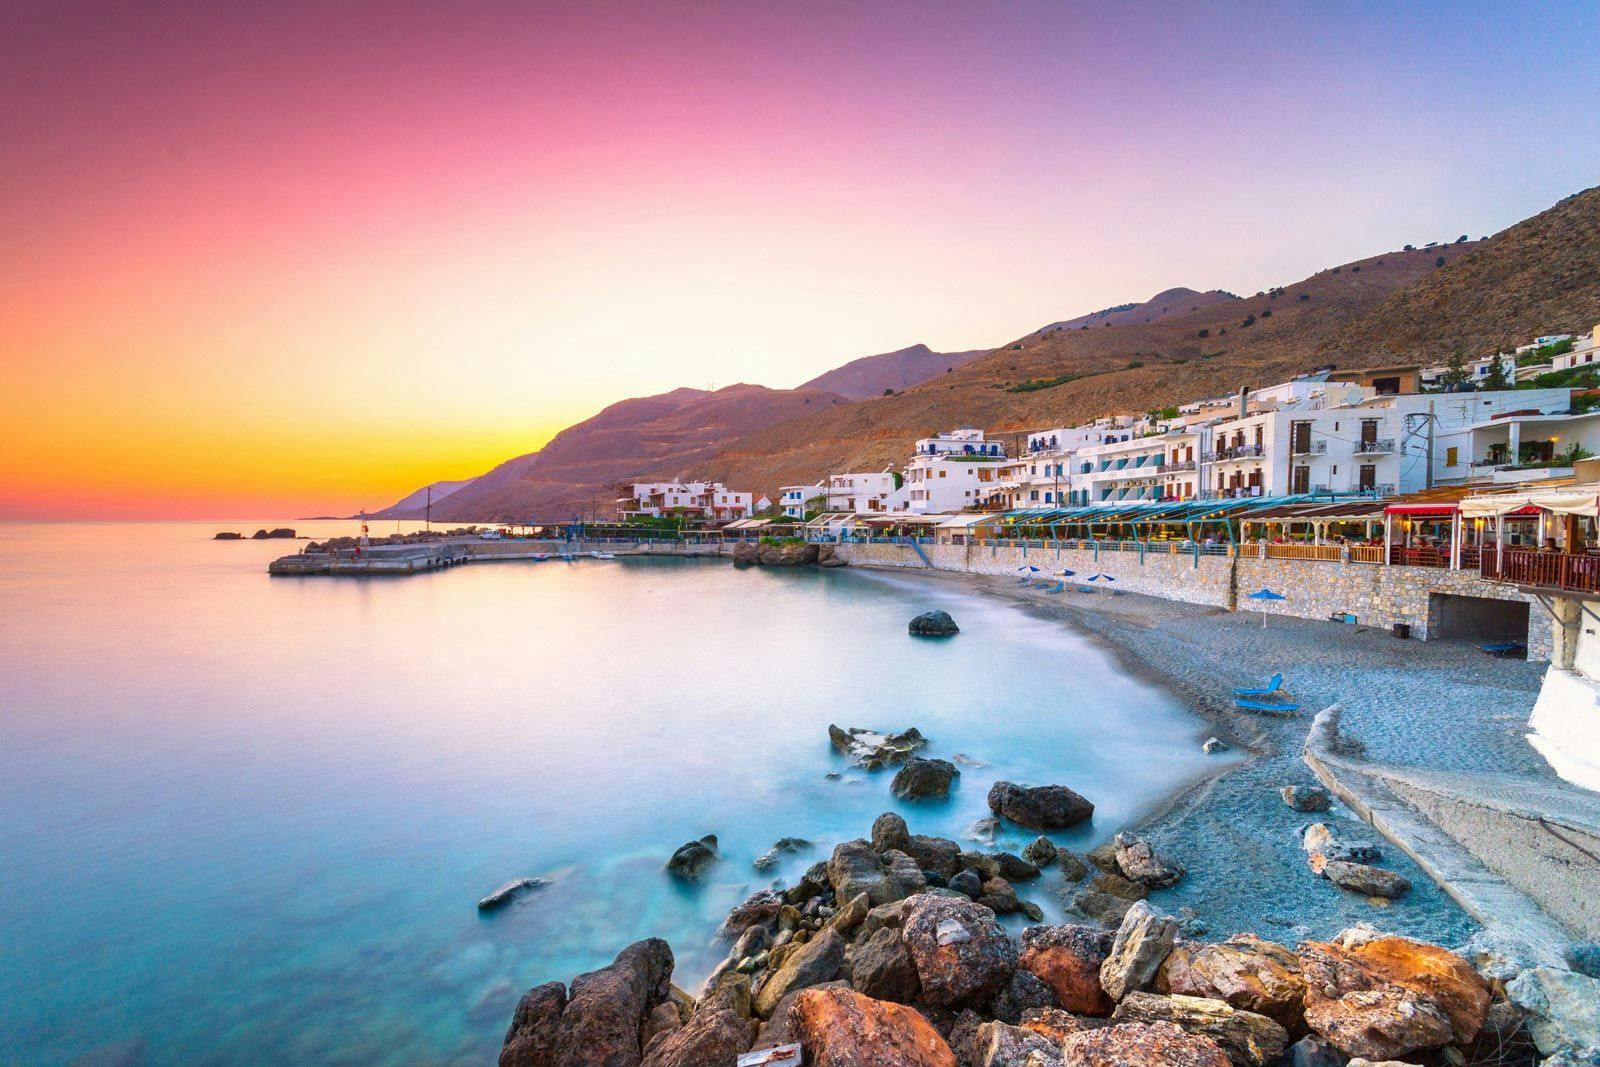 A Cretan village by the sea at sunset